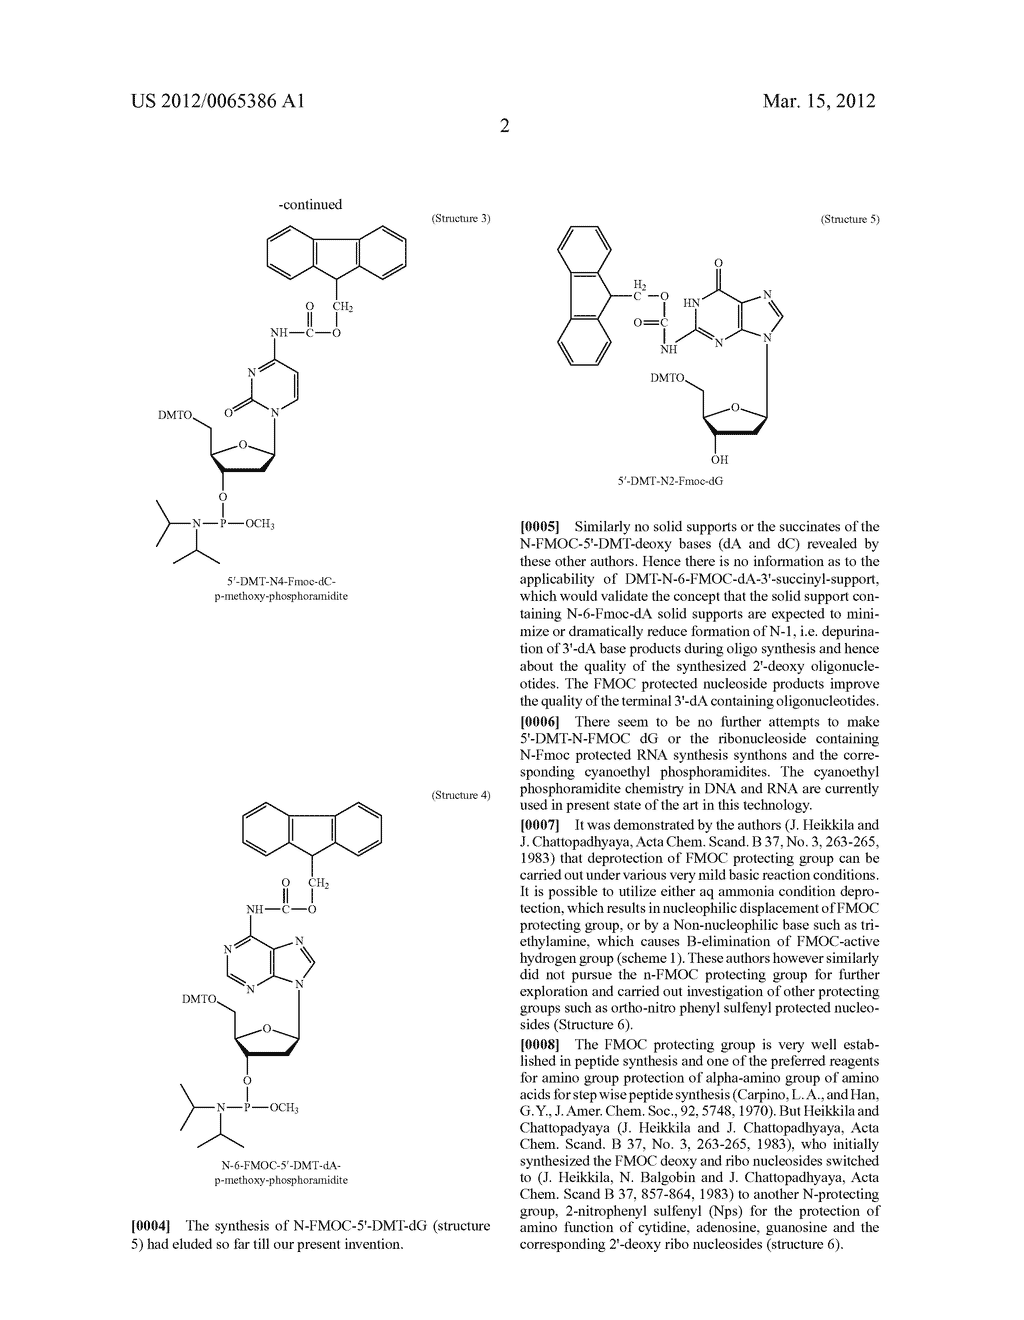 SYNTHESIS OF LABILE BASE PROTECTED - MODIFIED DEOXY & MODIFIED RIBO     NUCLEOSIDES, CORRESPONDING PHOSPHORAMIDITES AND SUPPORTS AND THEIR USE IN     HIGH PURITY OLIGONUCLEOTIDE SYNTHESIS - diagram, schematic, and image 20